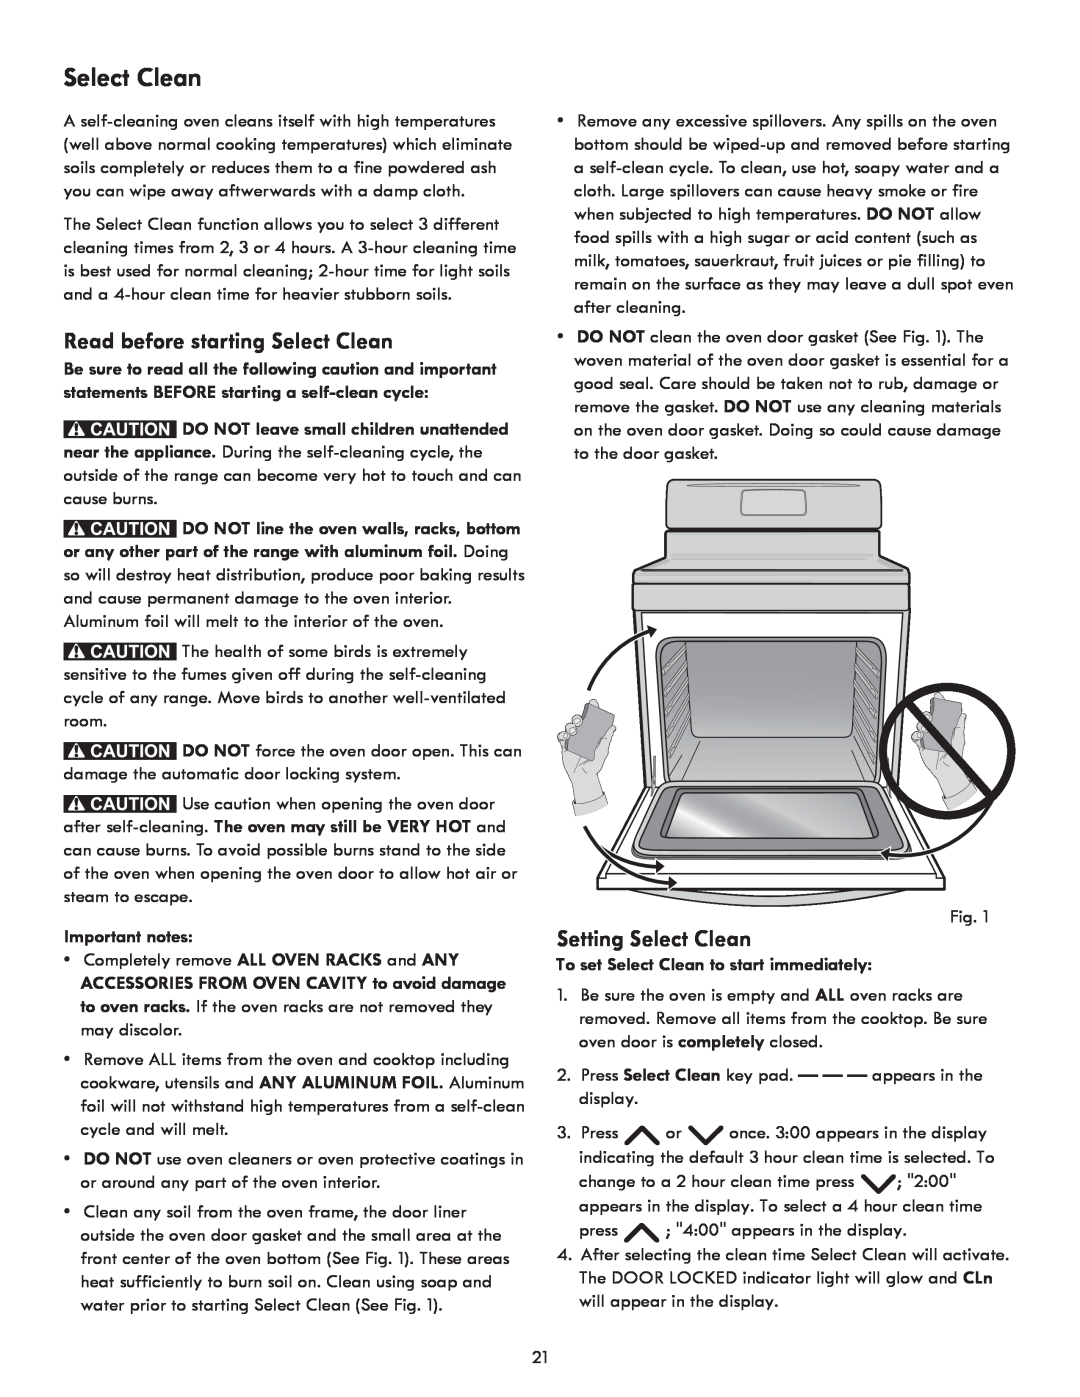 Kenmore 7250, 7271 Read before starting Select Clean, Setting Select Clean, To set Select Clean to start immediately 